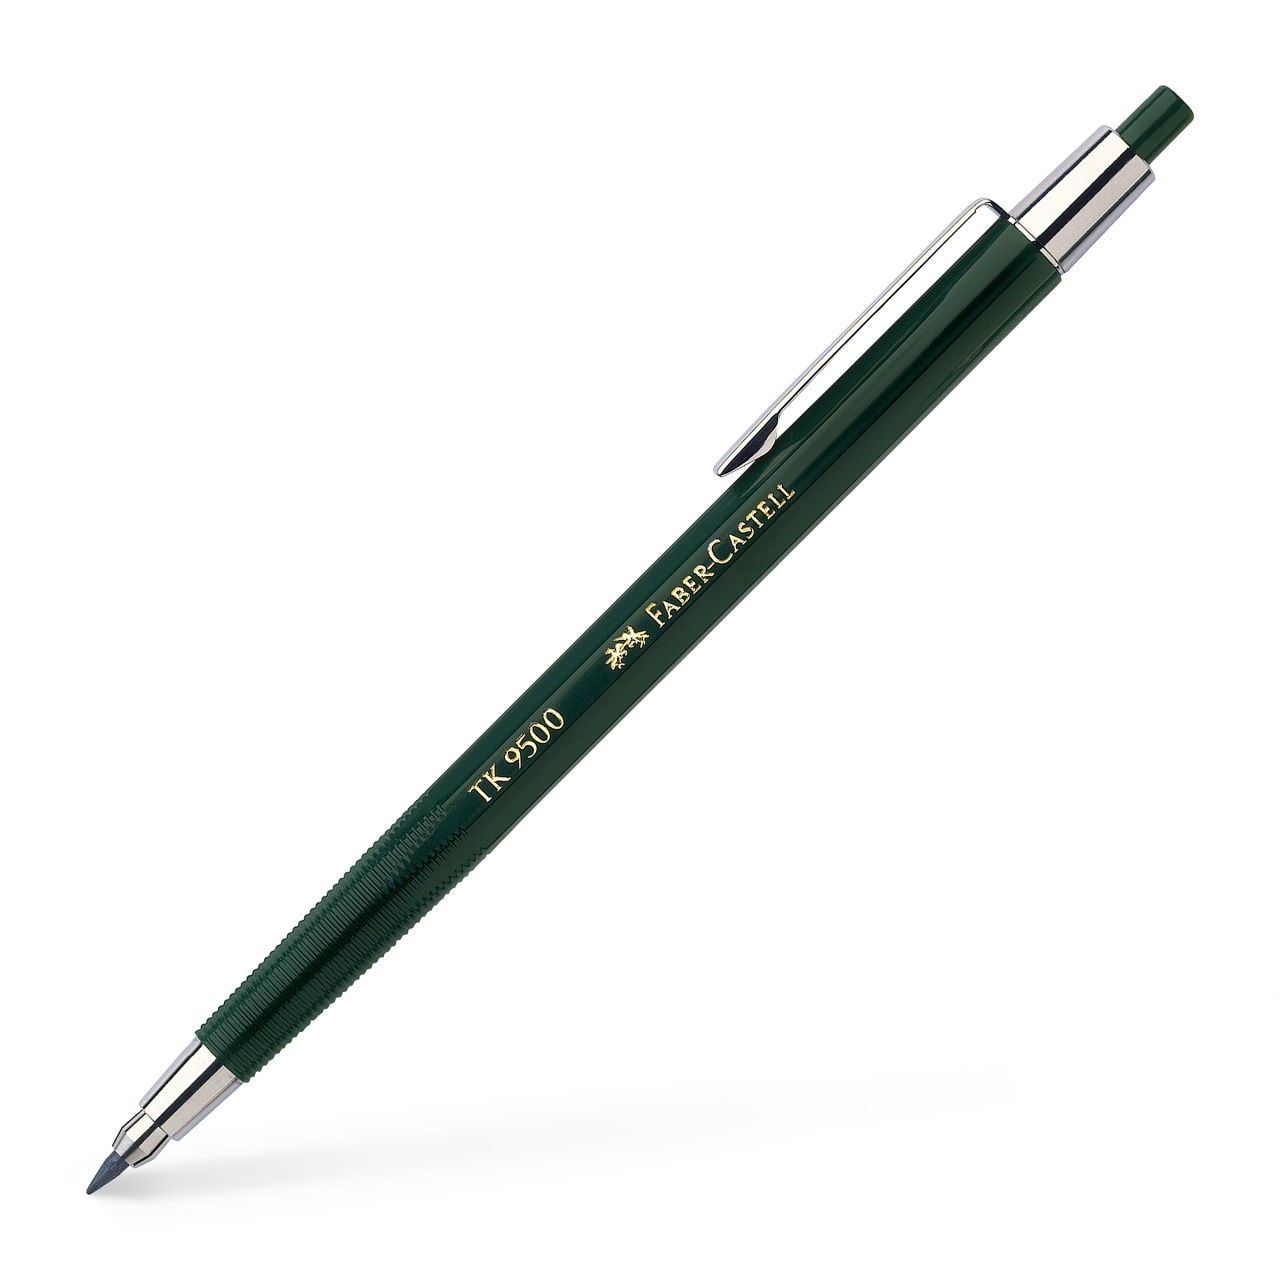 TK 9500 Lead holder 2 mm in the group Pens / Writing / Mechanical Pencils at Pen Store (106261)